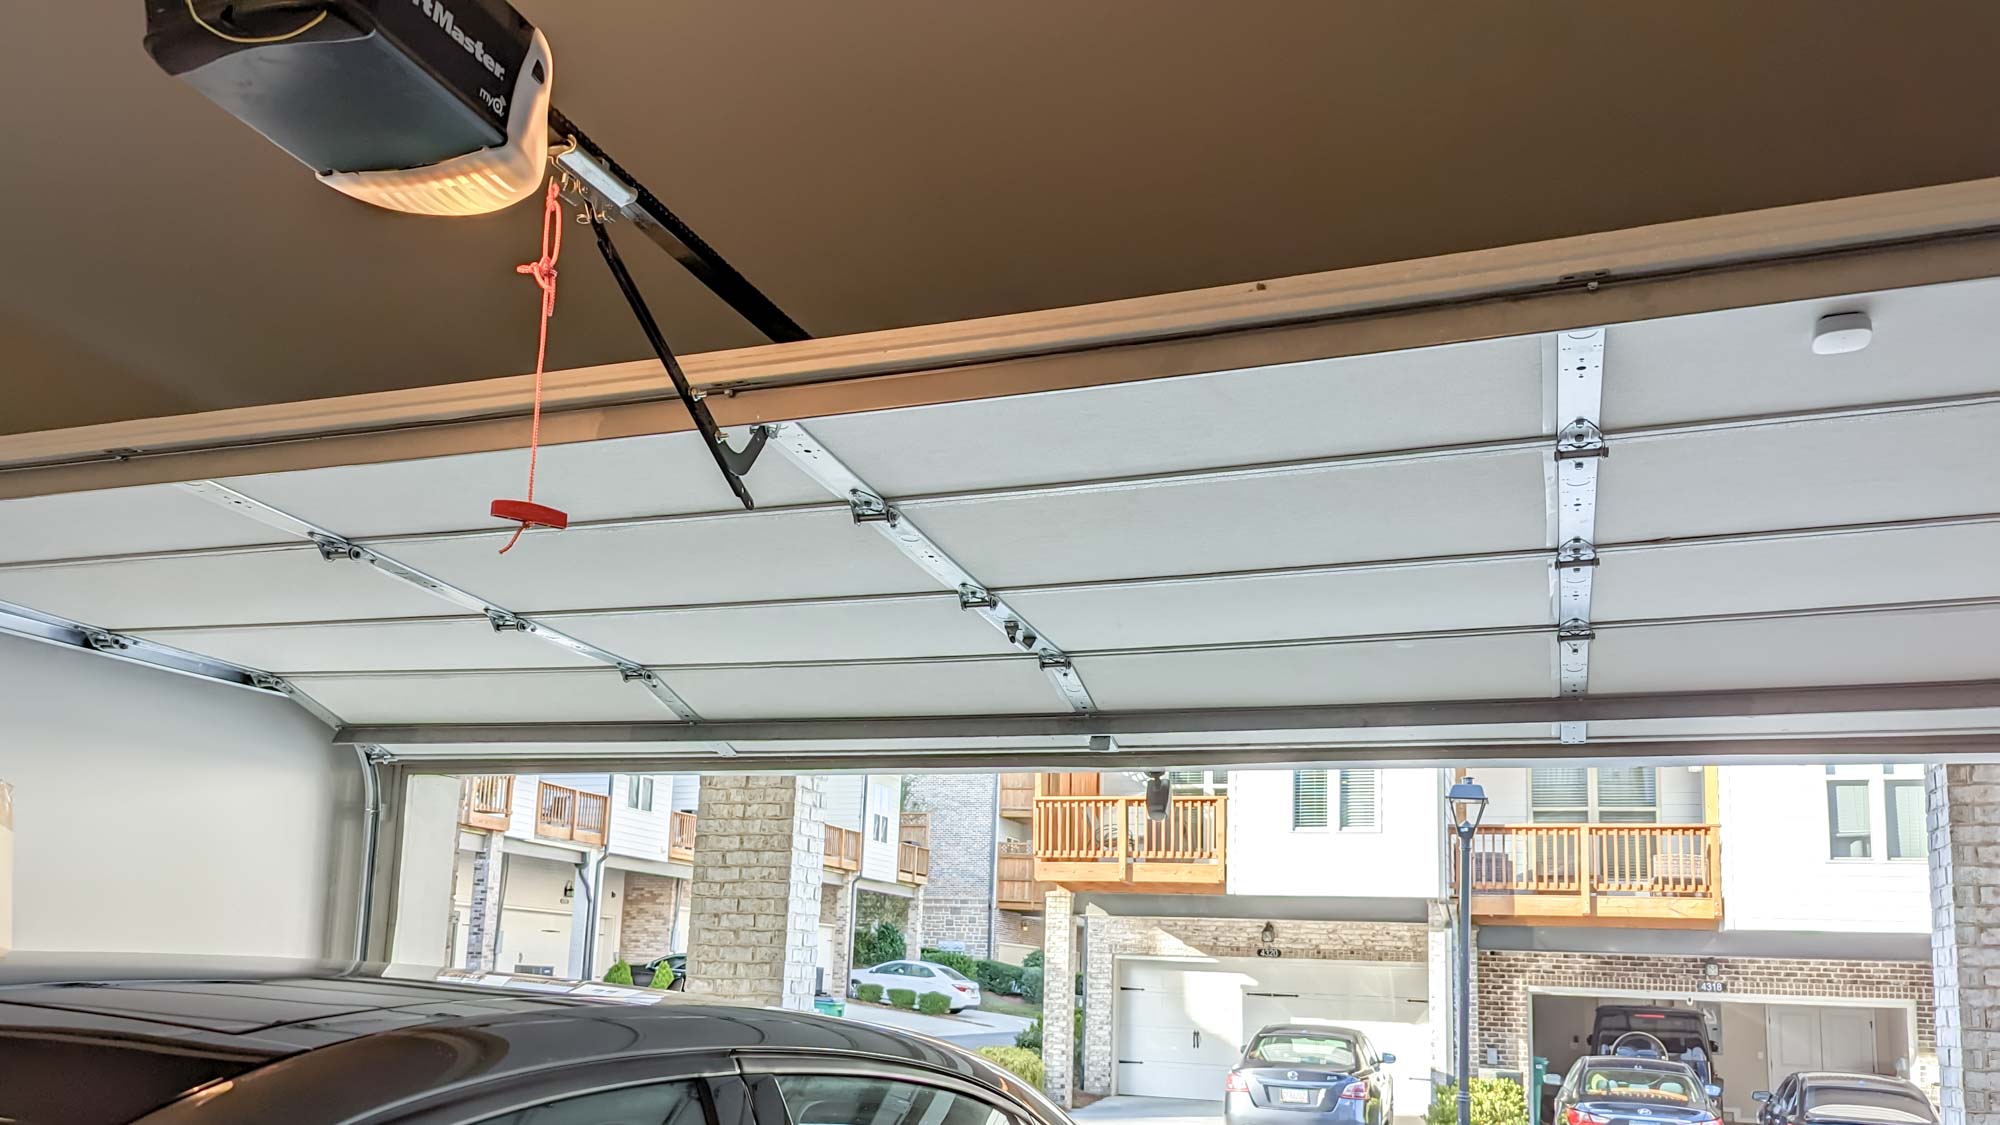 This  gadget automated my garage with no hassles